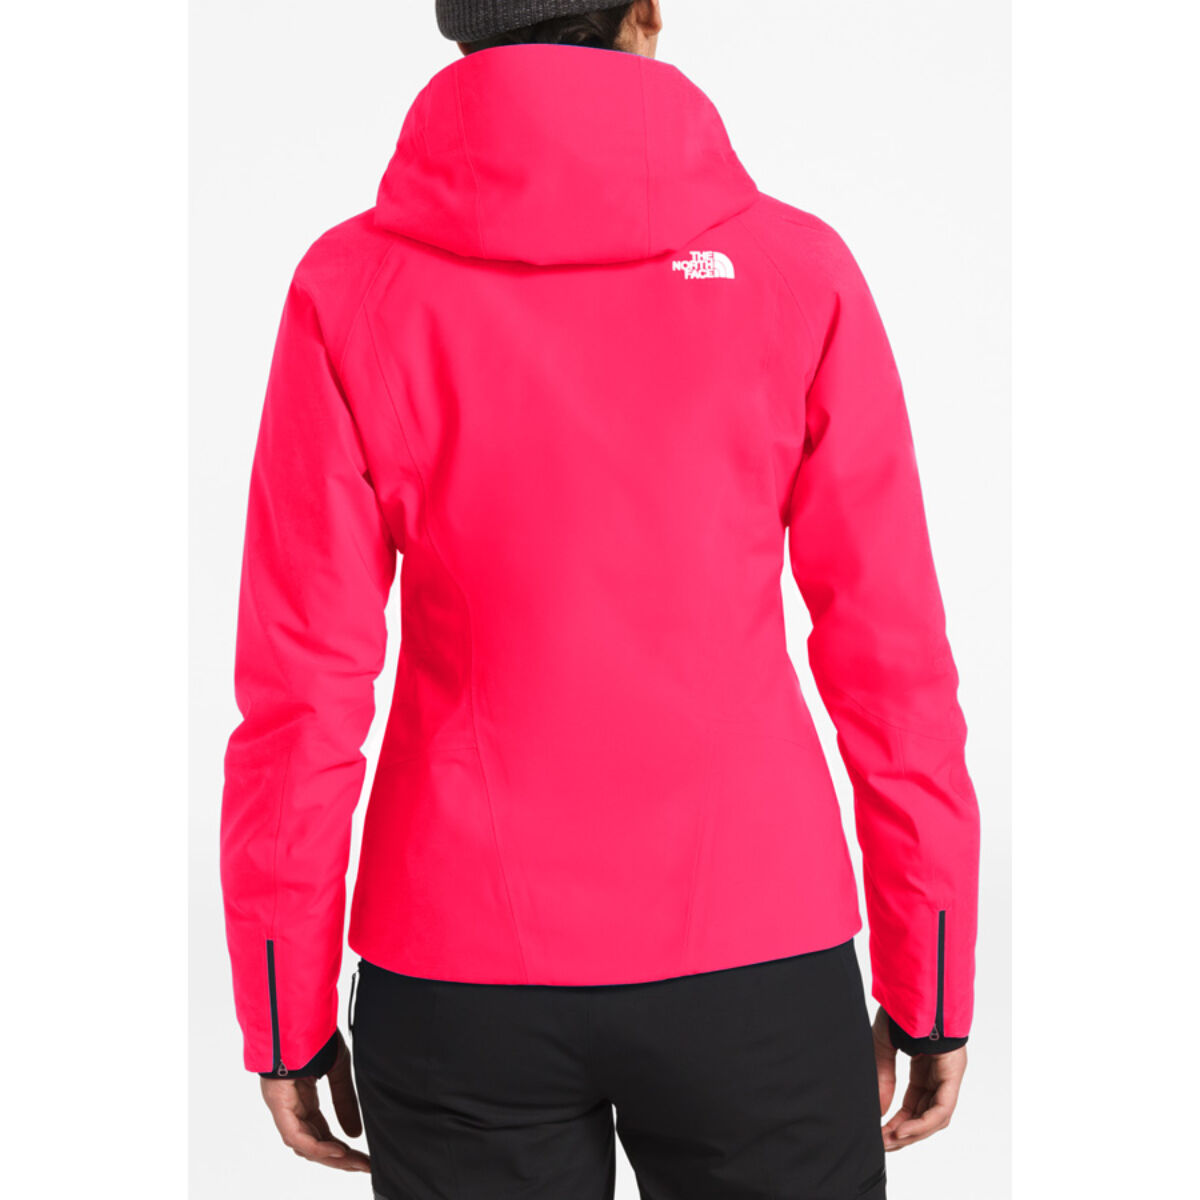 North Face Anonym Jacket - Womens - 18 